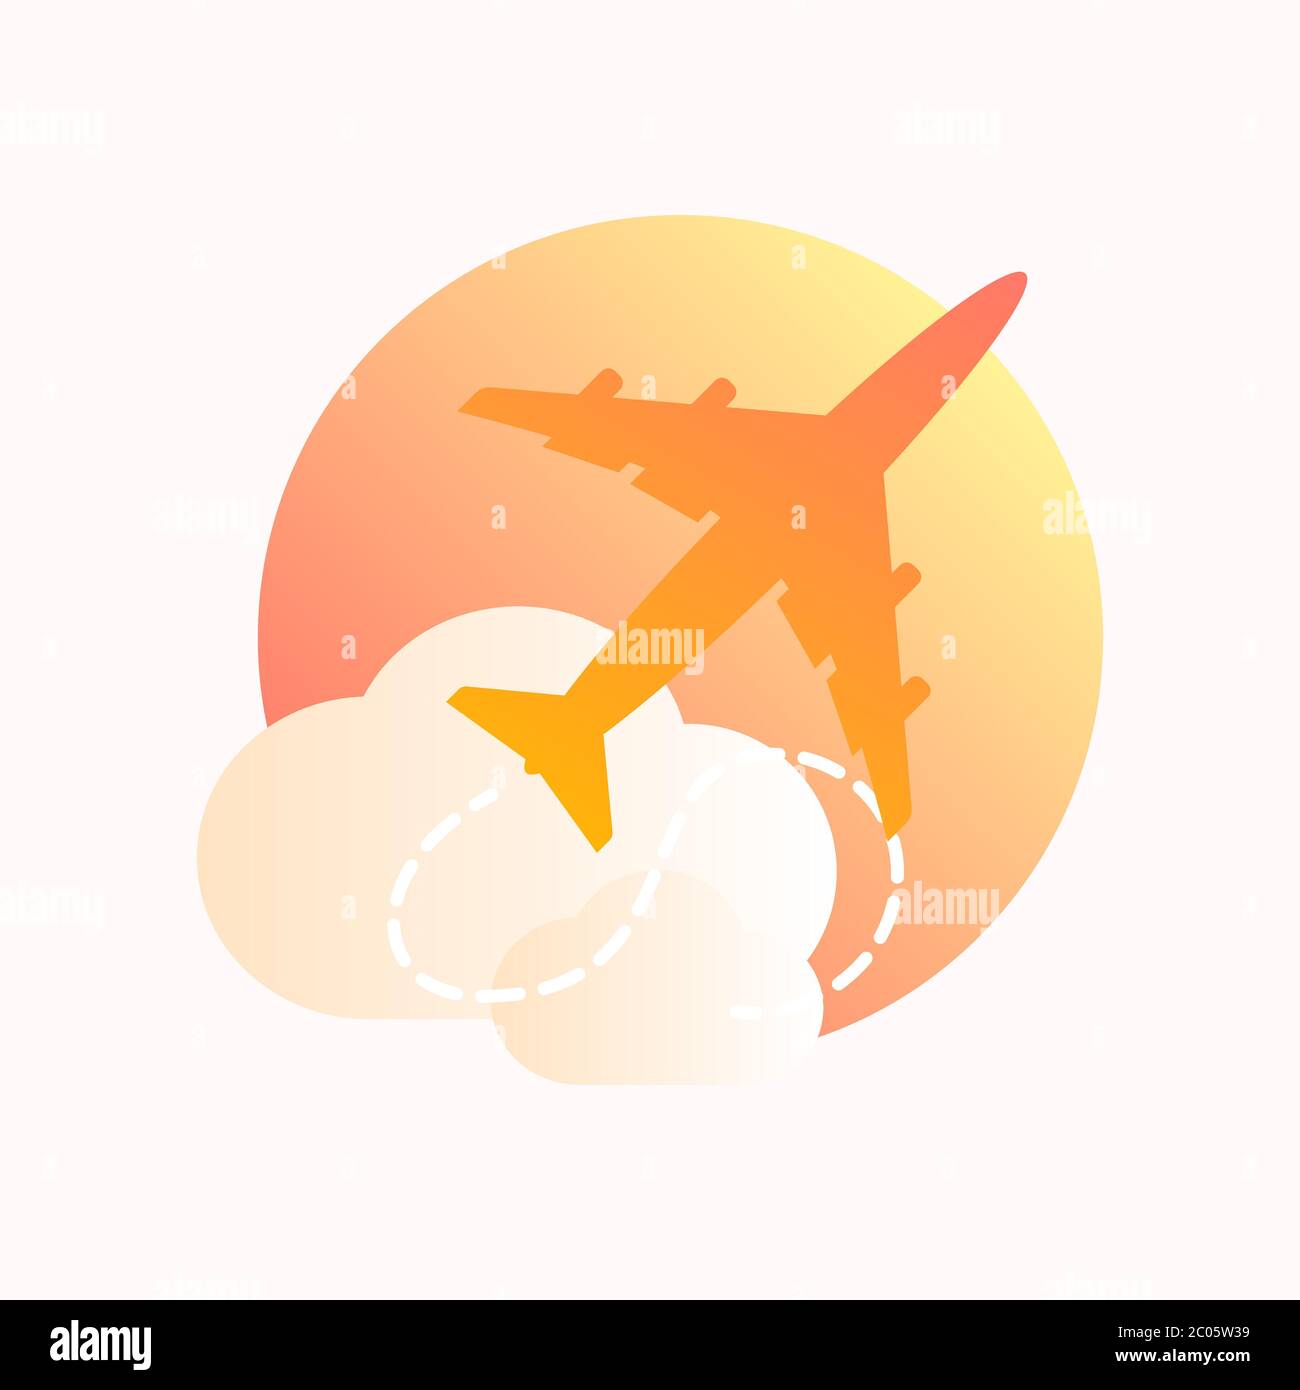 Flat vector art of a plane silhouette in the sky over a sun and clouds in warm red, yellow and orange colors. Great for travel and vacations advert. Stock Vector